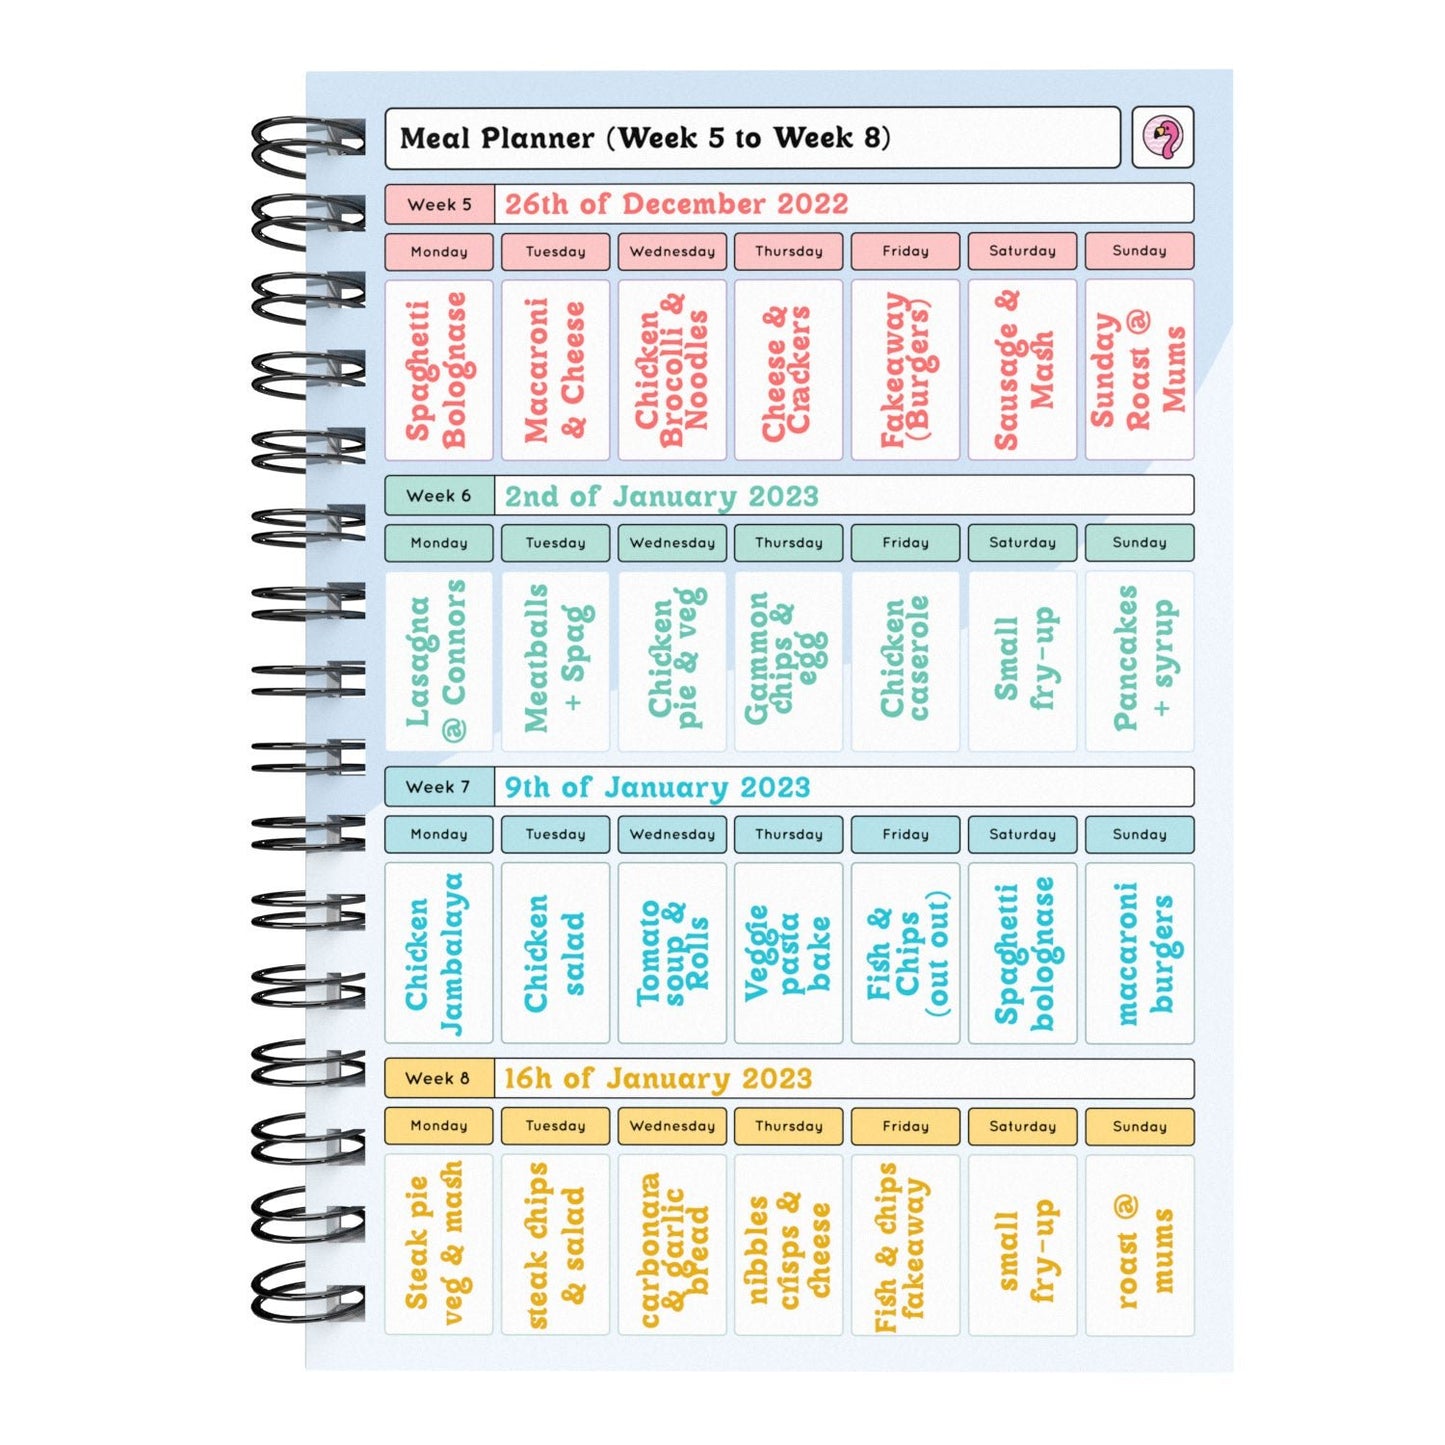 Food Diary - C13 - Calorie Counting - Fabulous Planning - [W] 3MTH - CAL - C13+